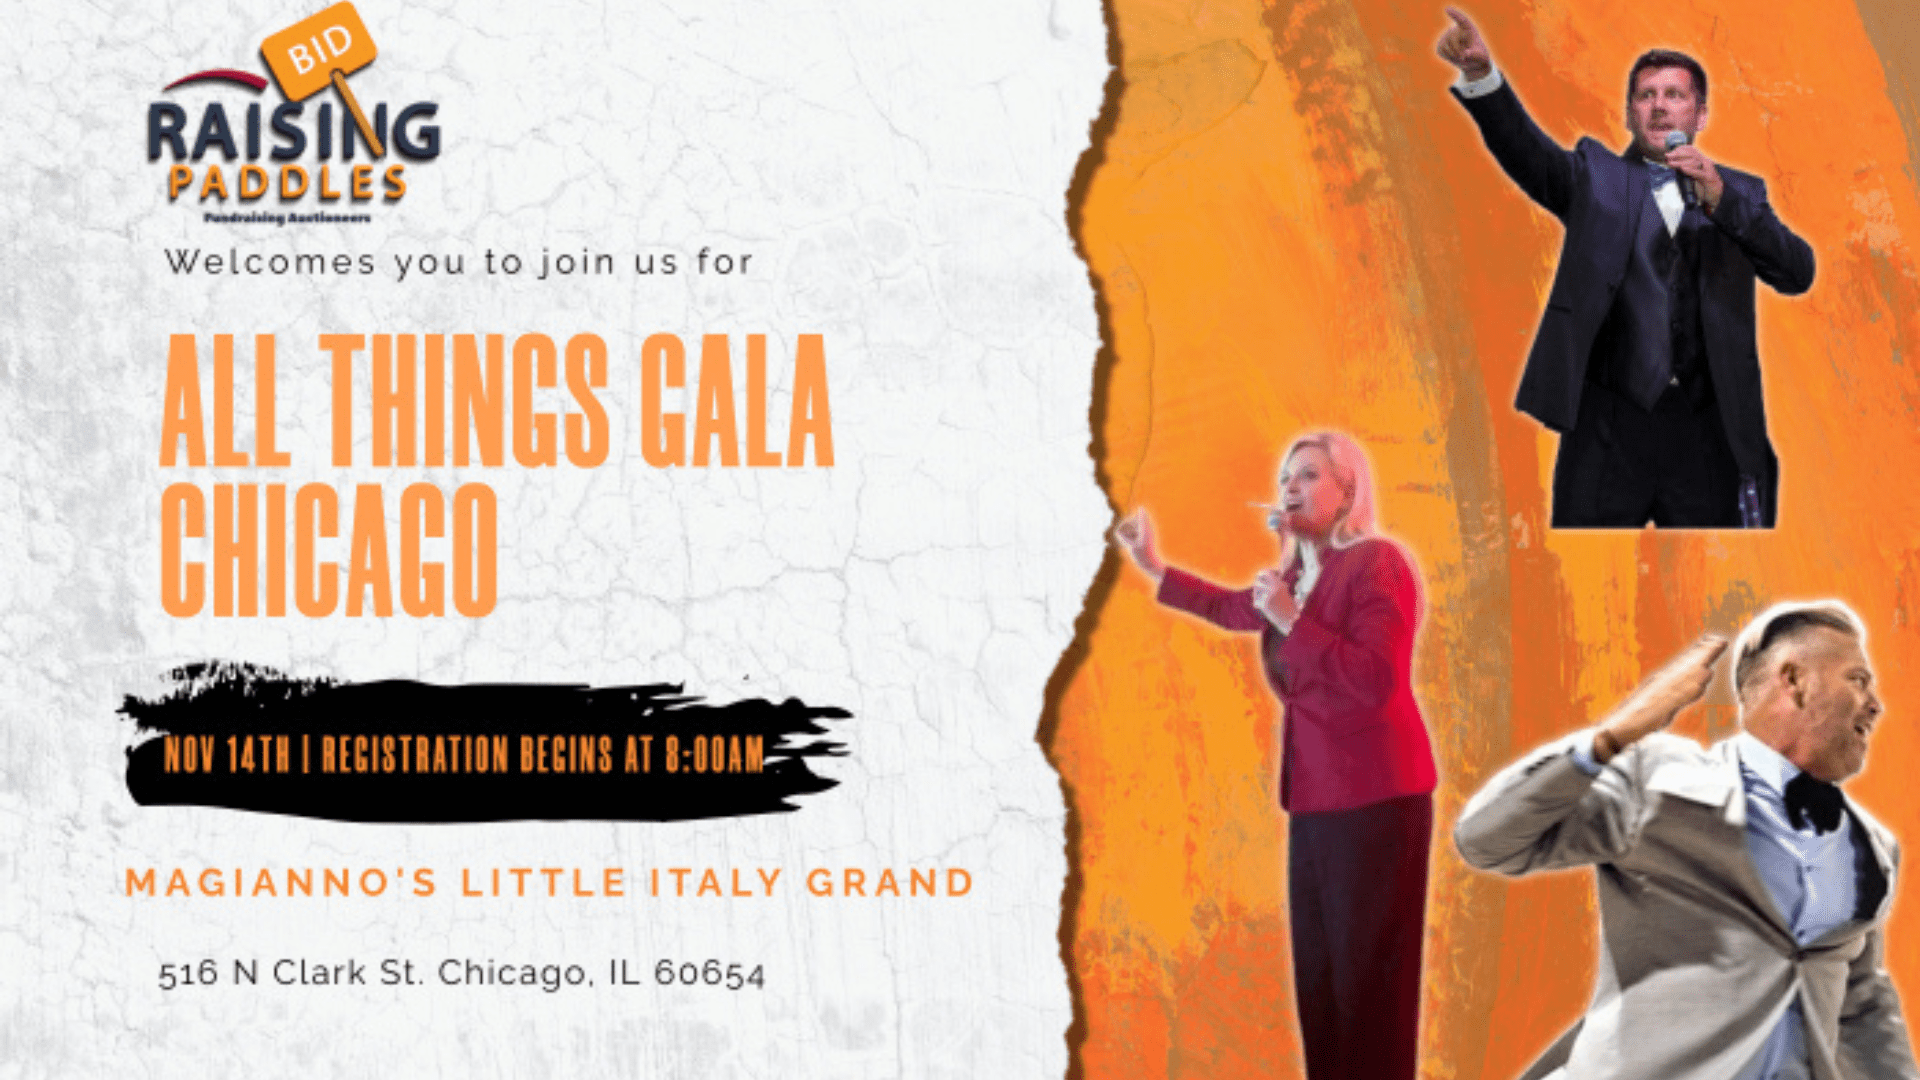 All Things Gala Chicago